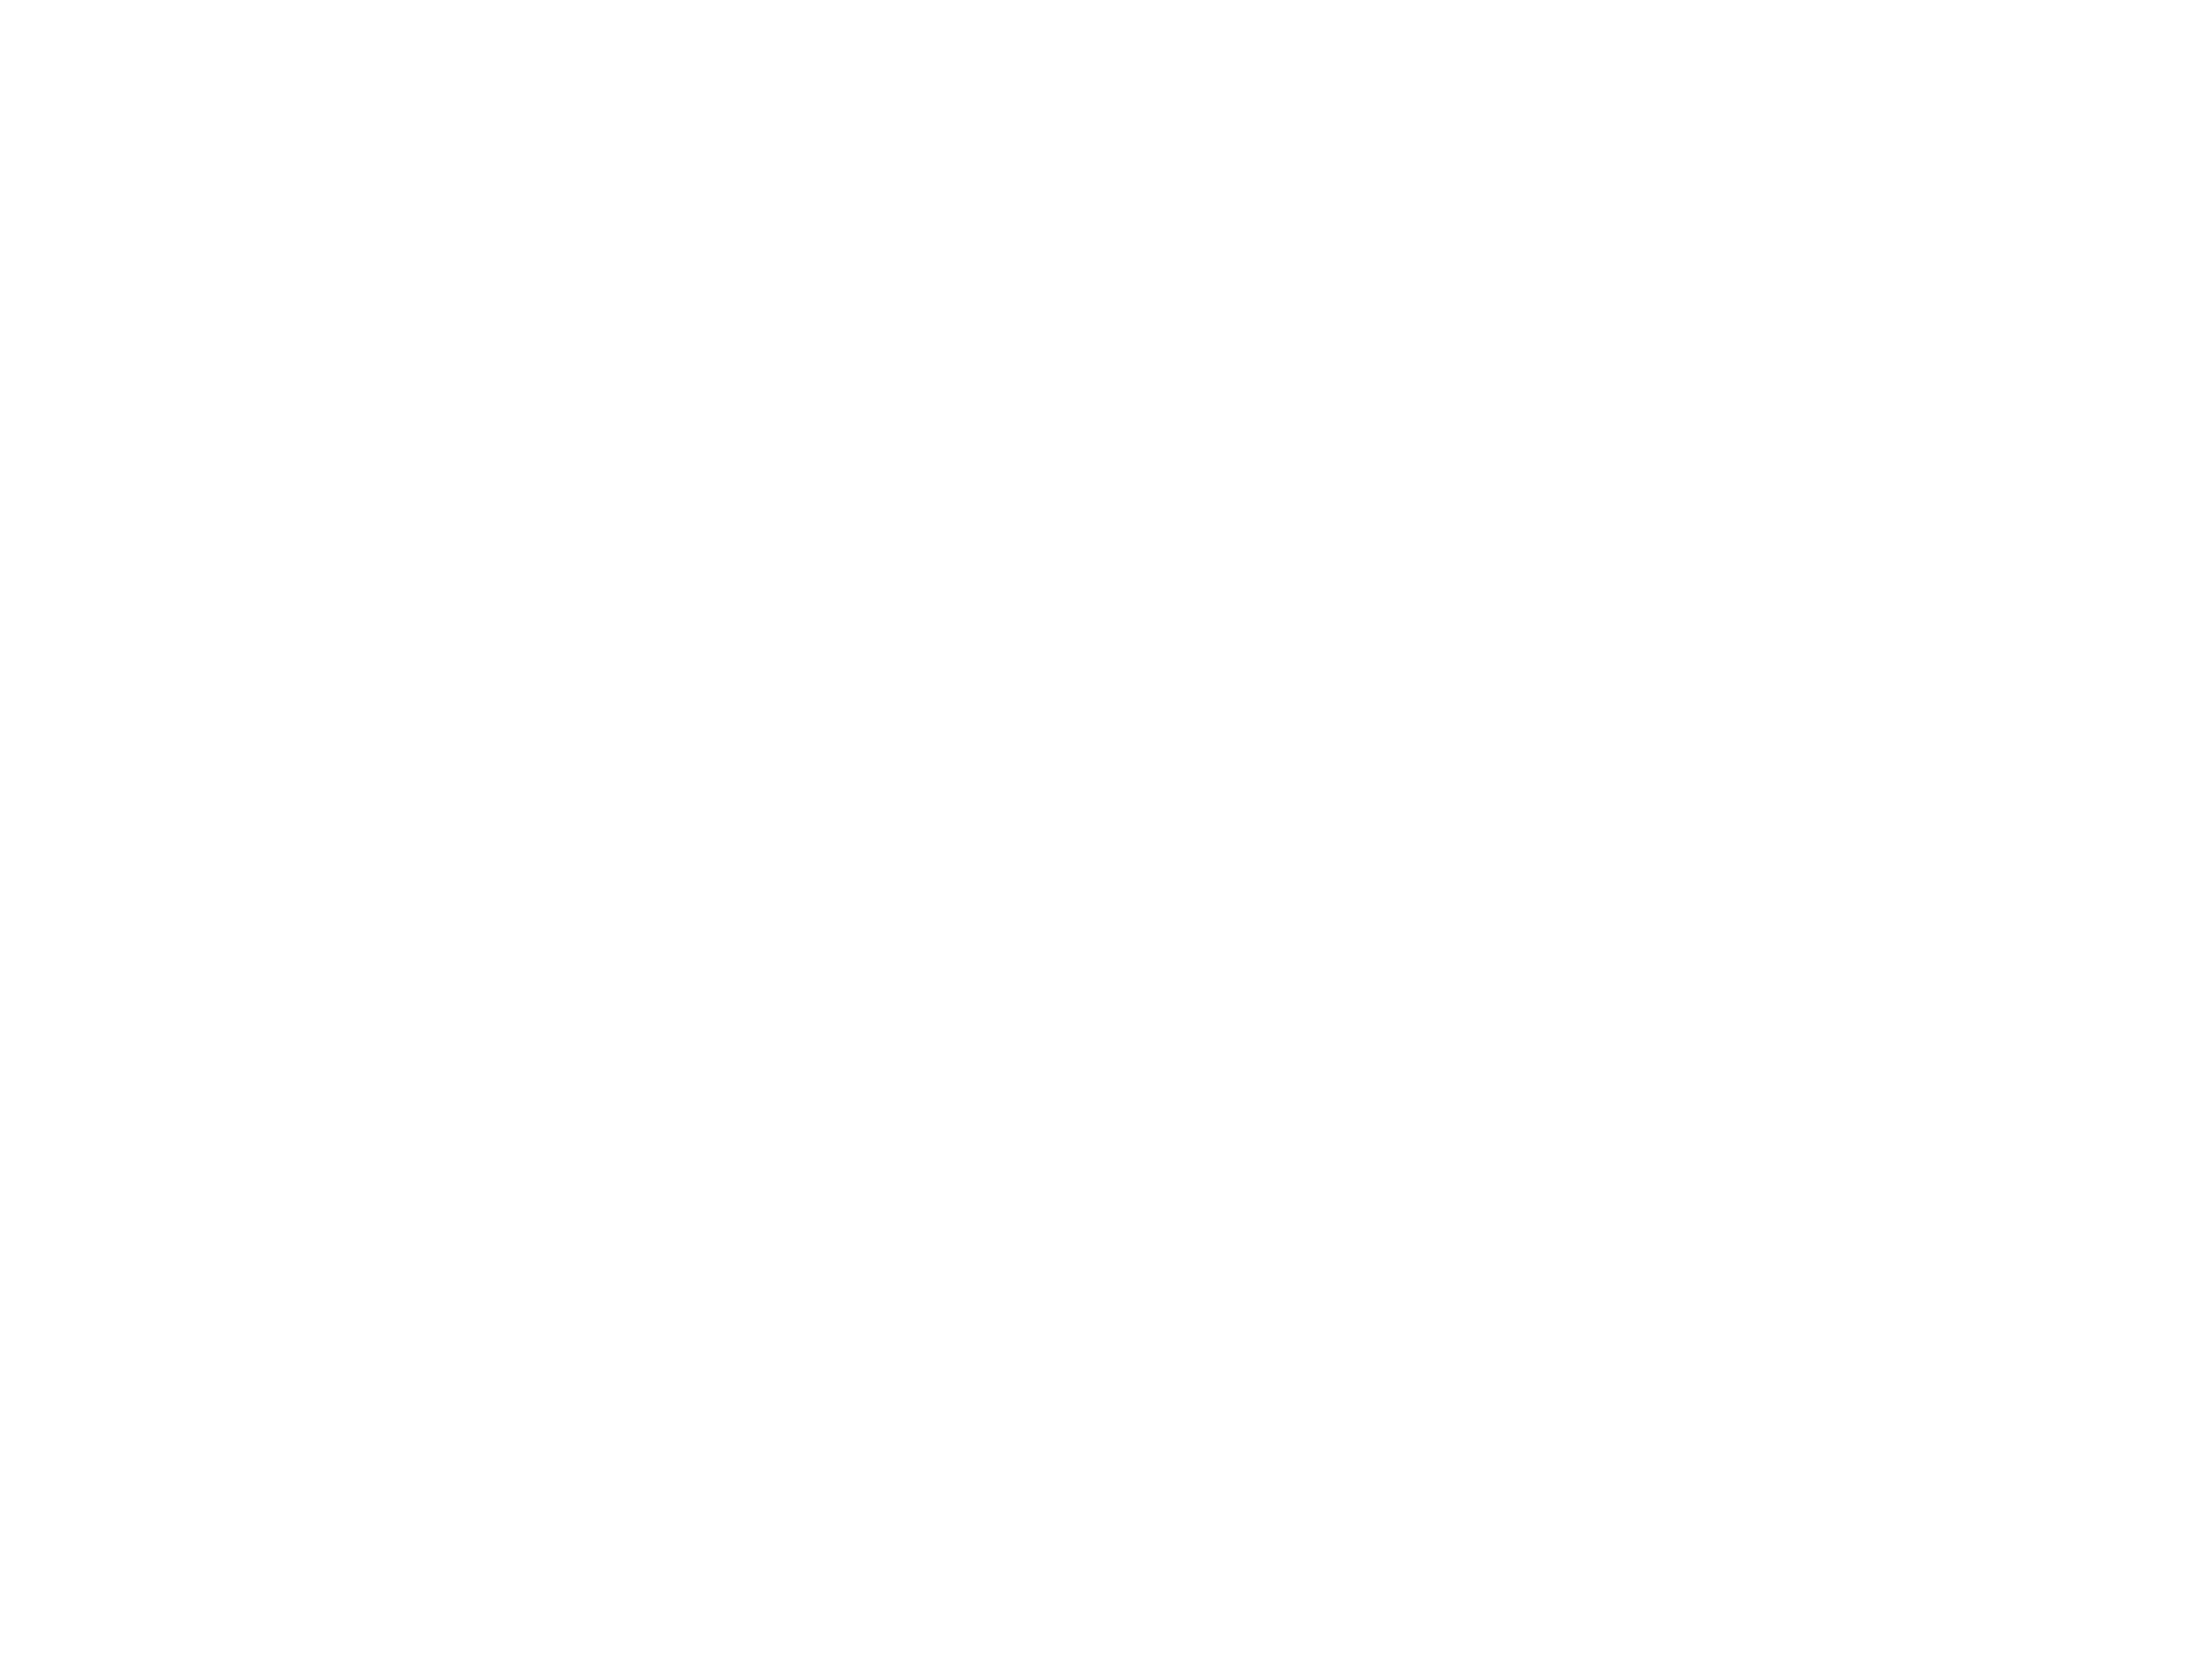 You Have A Future In Real Estate